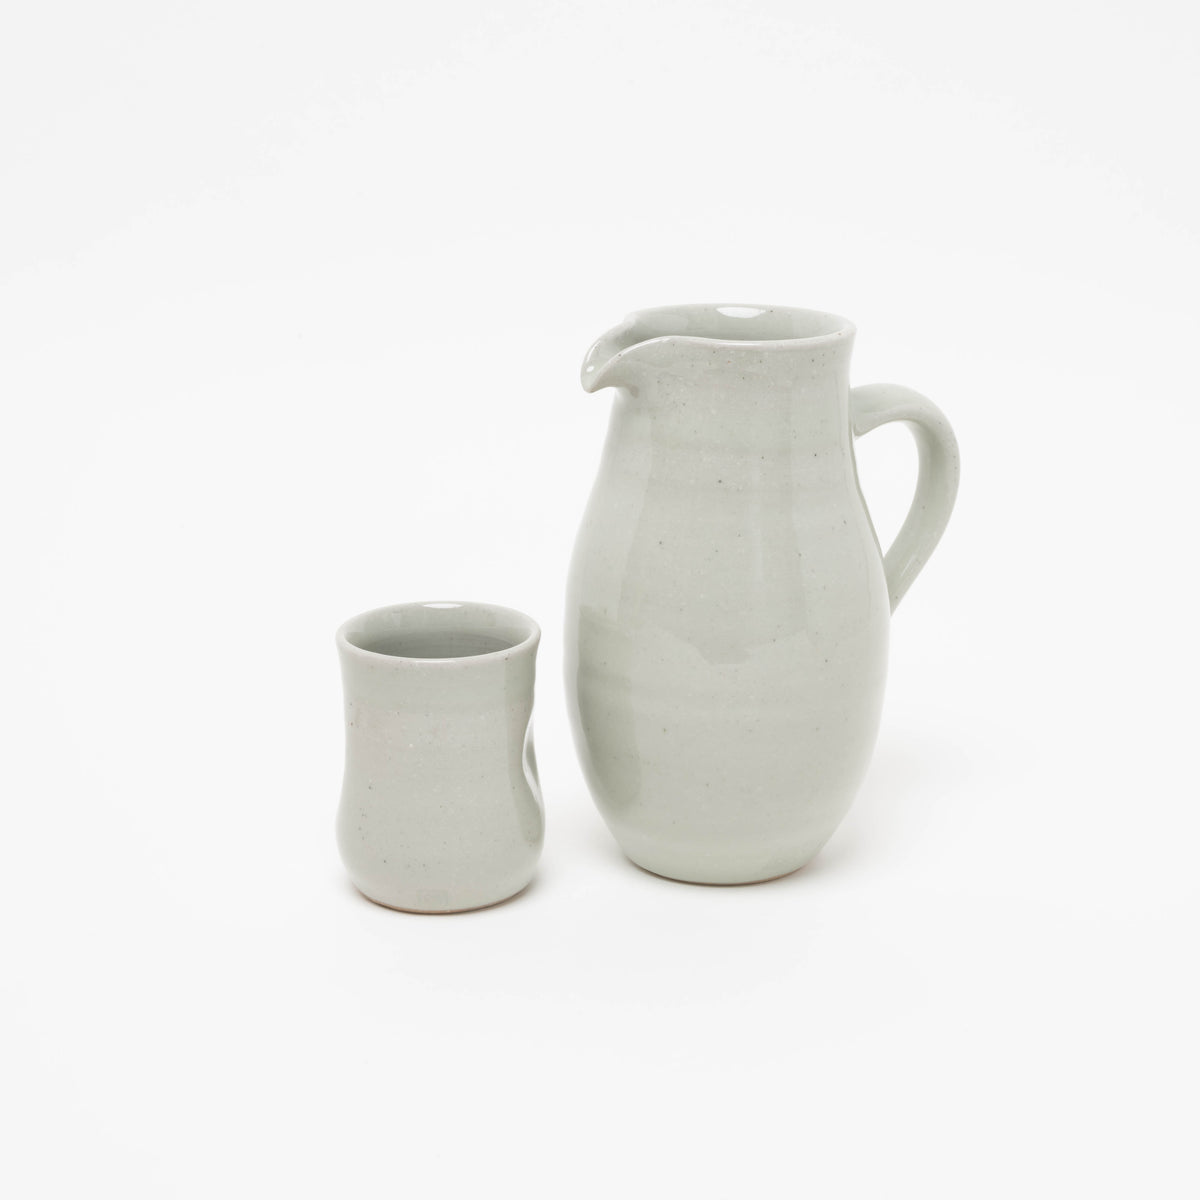 Urform - stoneware cup with recessed grip high